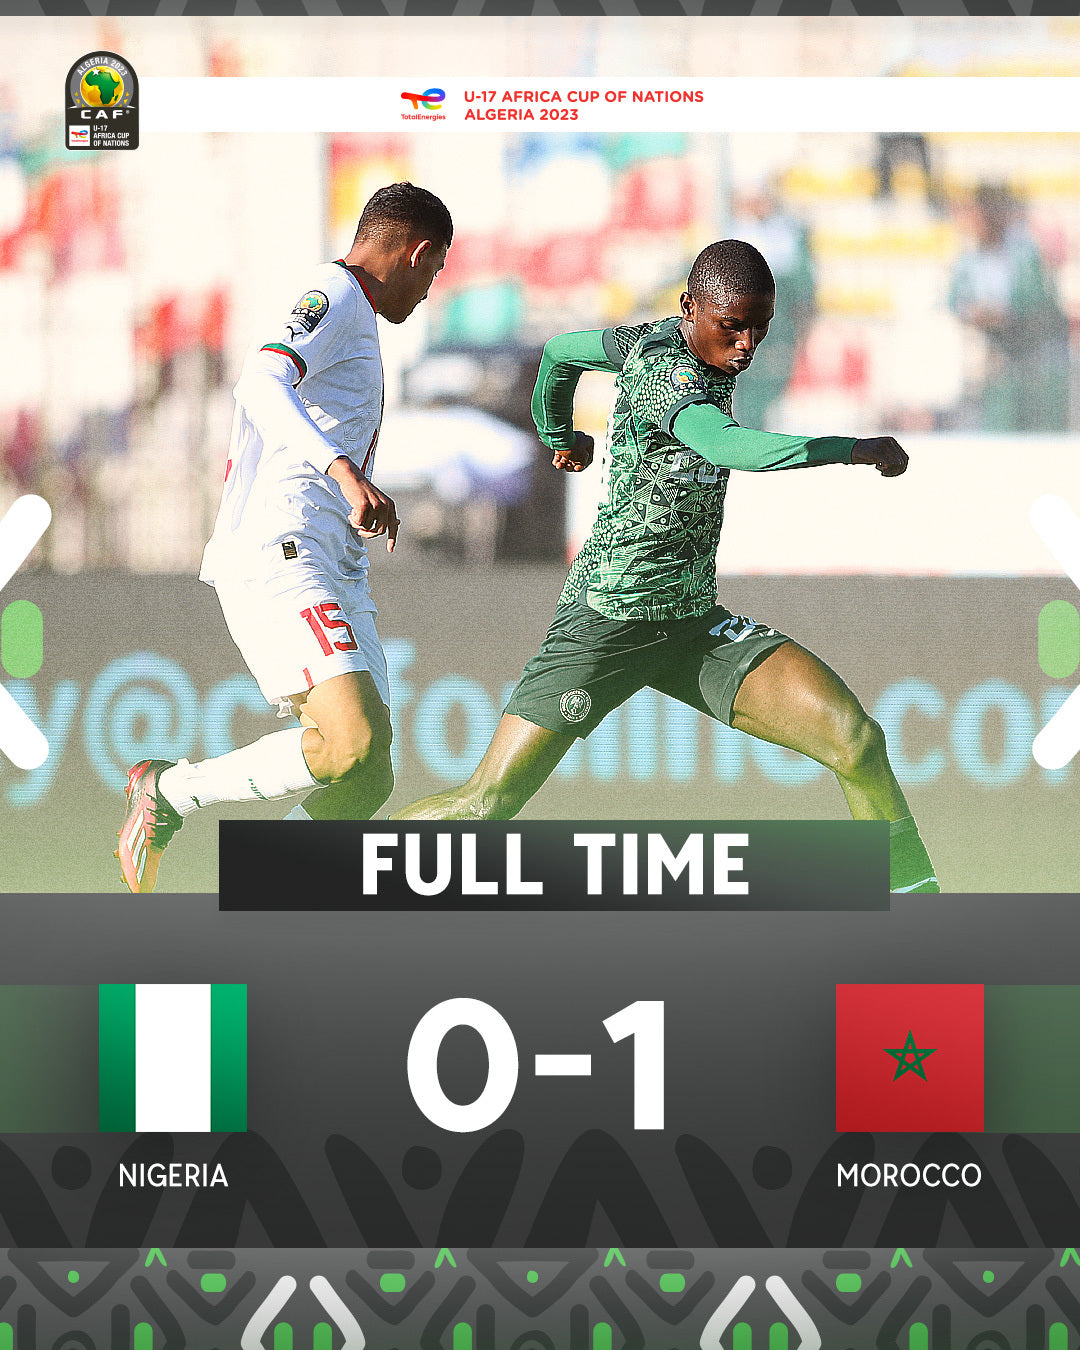 Nigeria suffer defeat to Morocco in Group B U17 AFCON clash